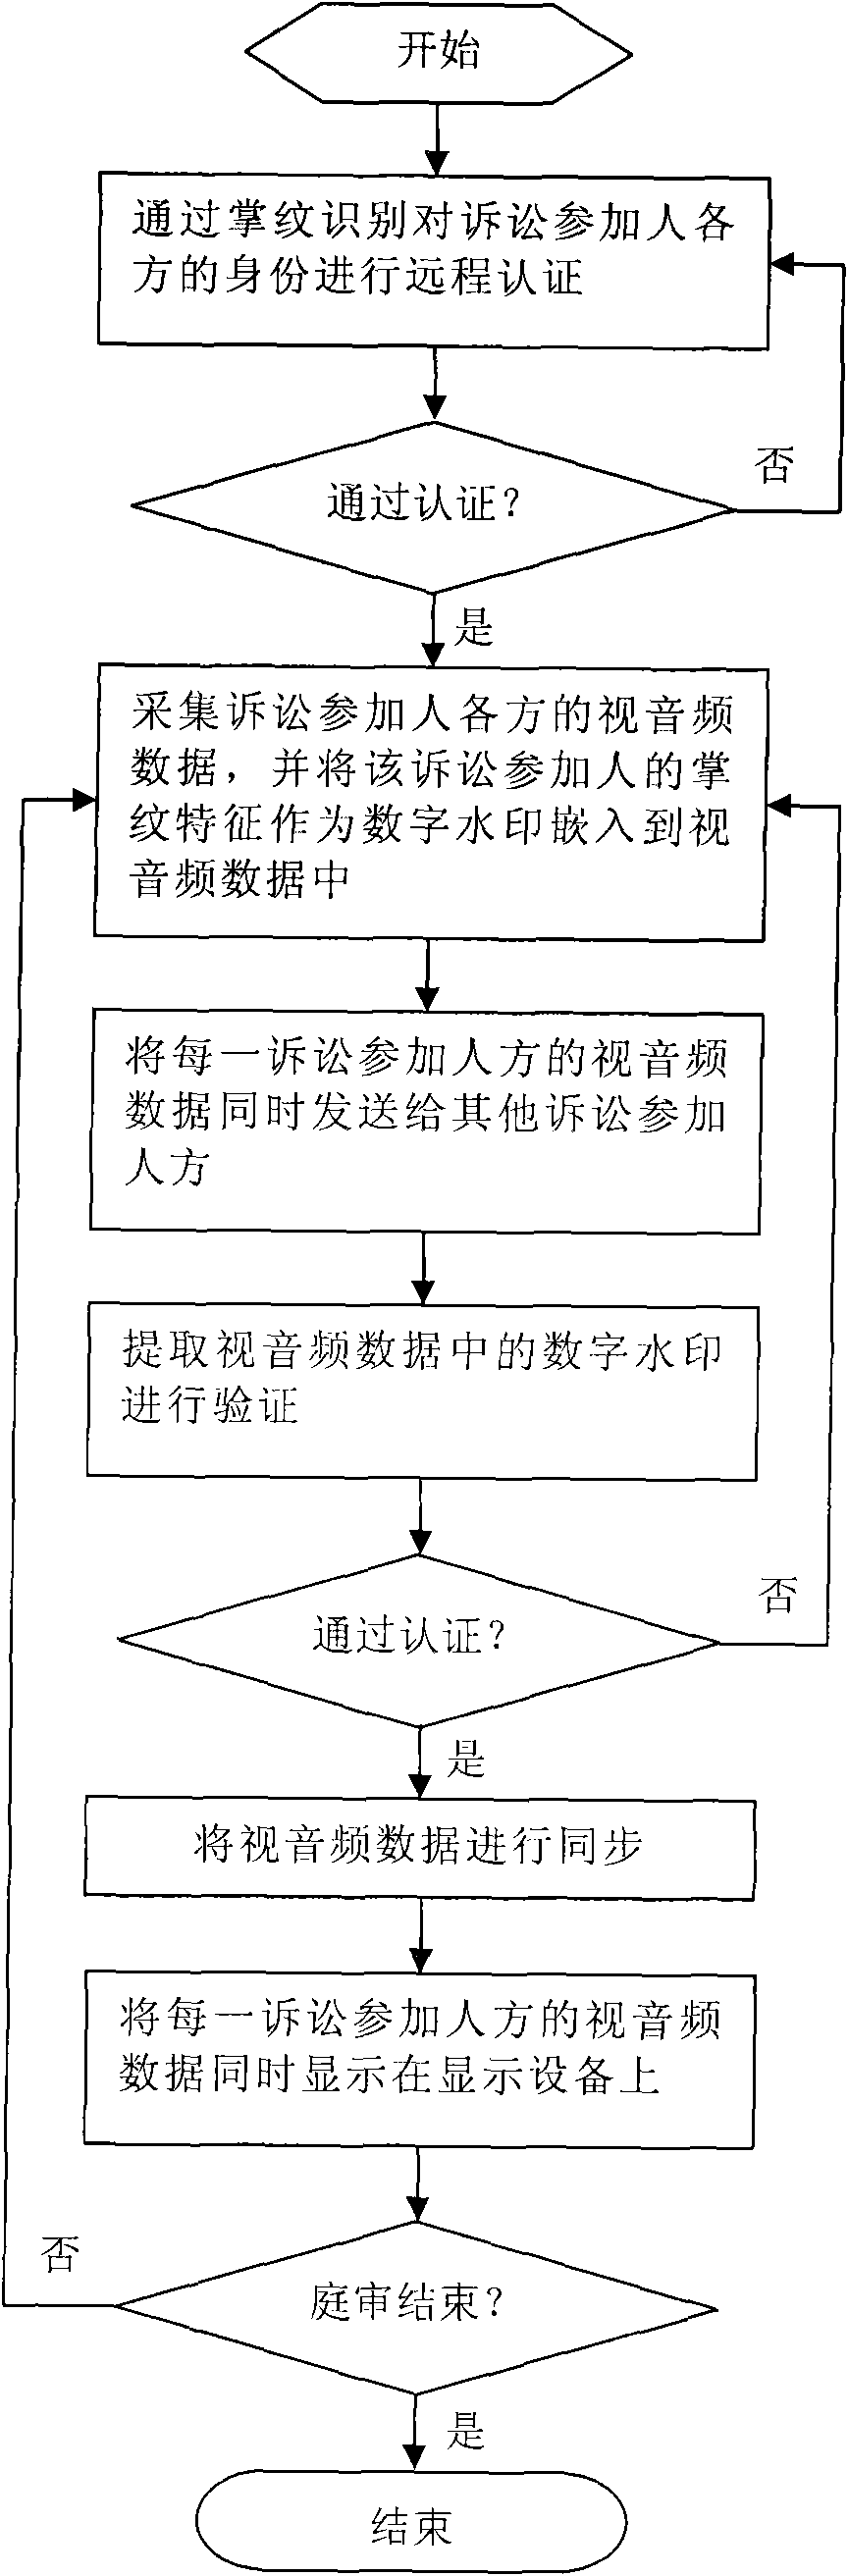 Palmprint authentication and digital watermark-based remote digital court trial method